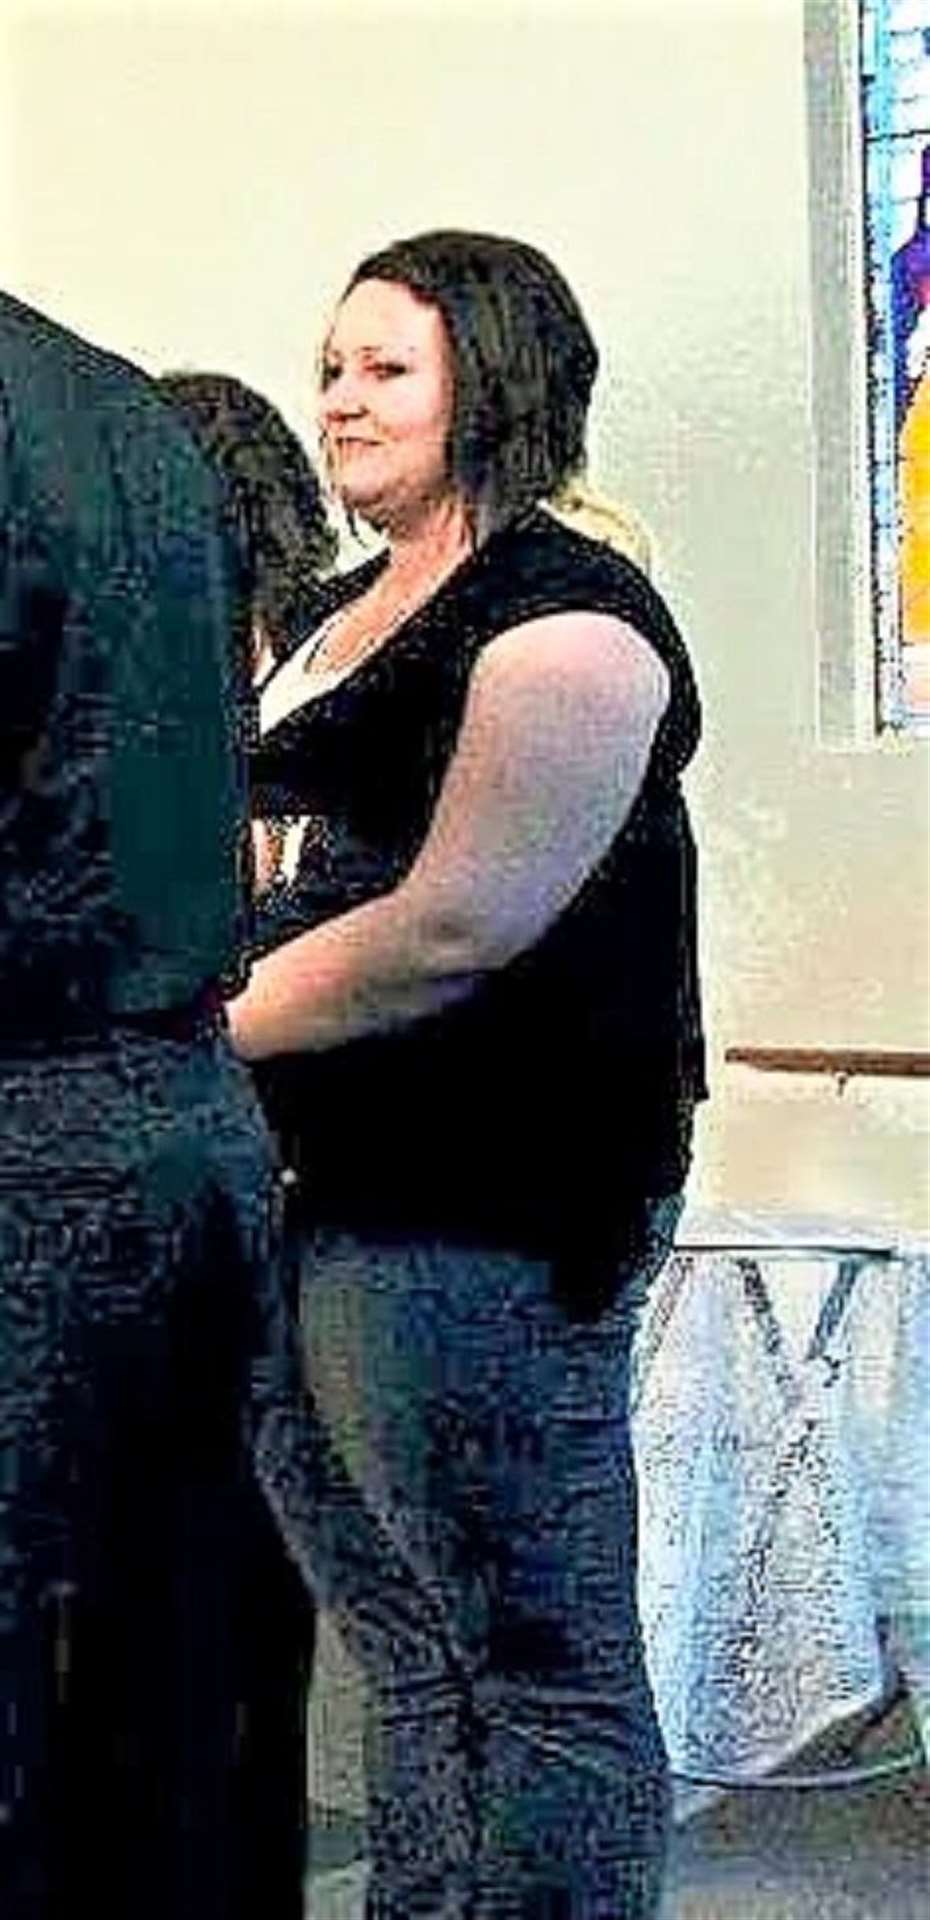 Danielle struggled for years with her weight.